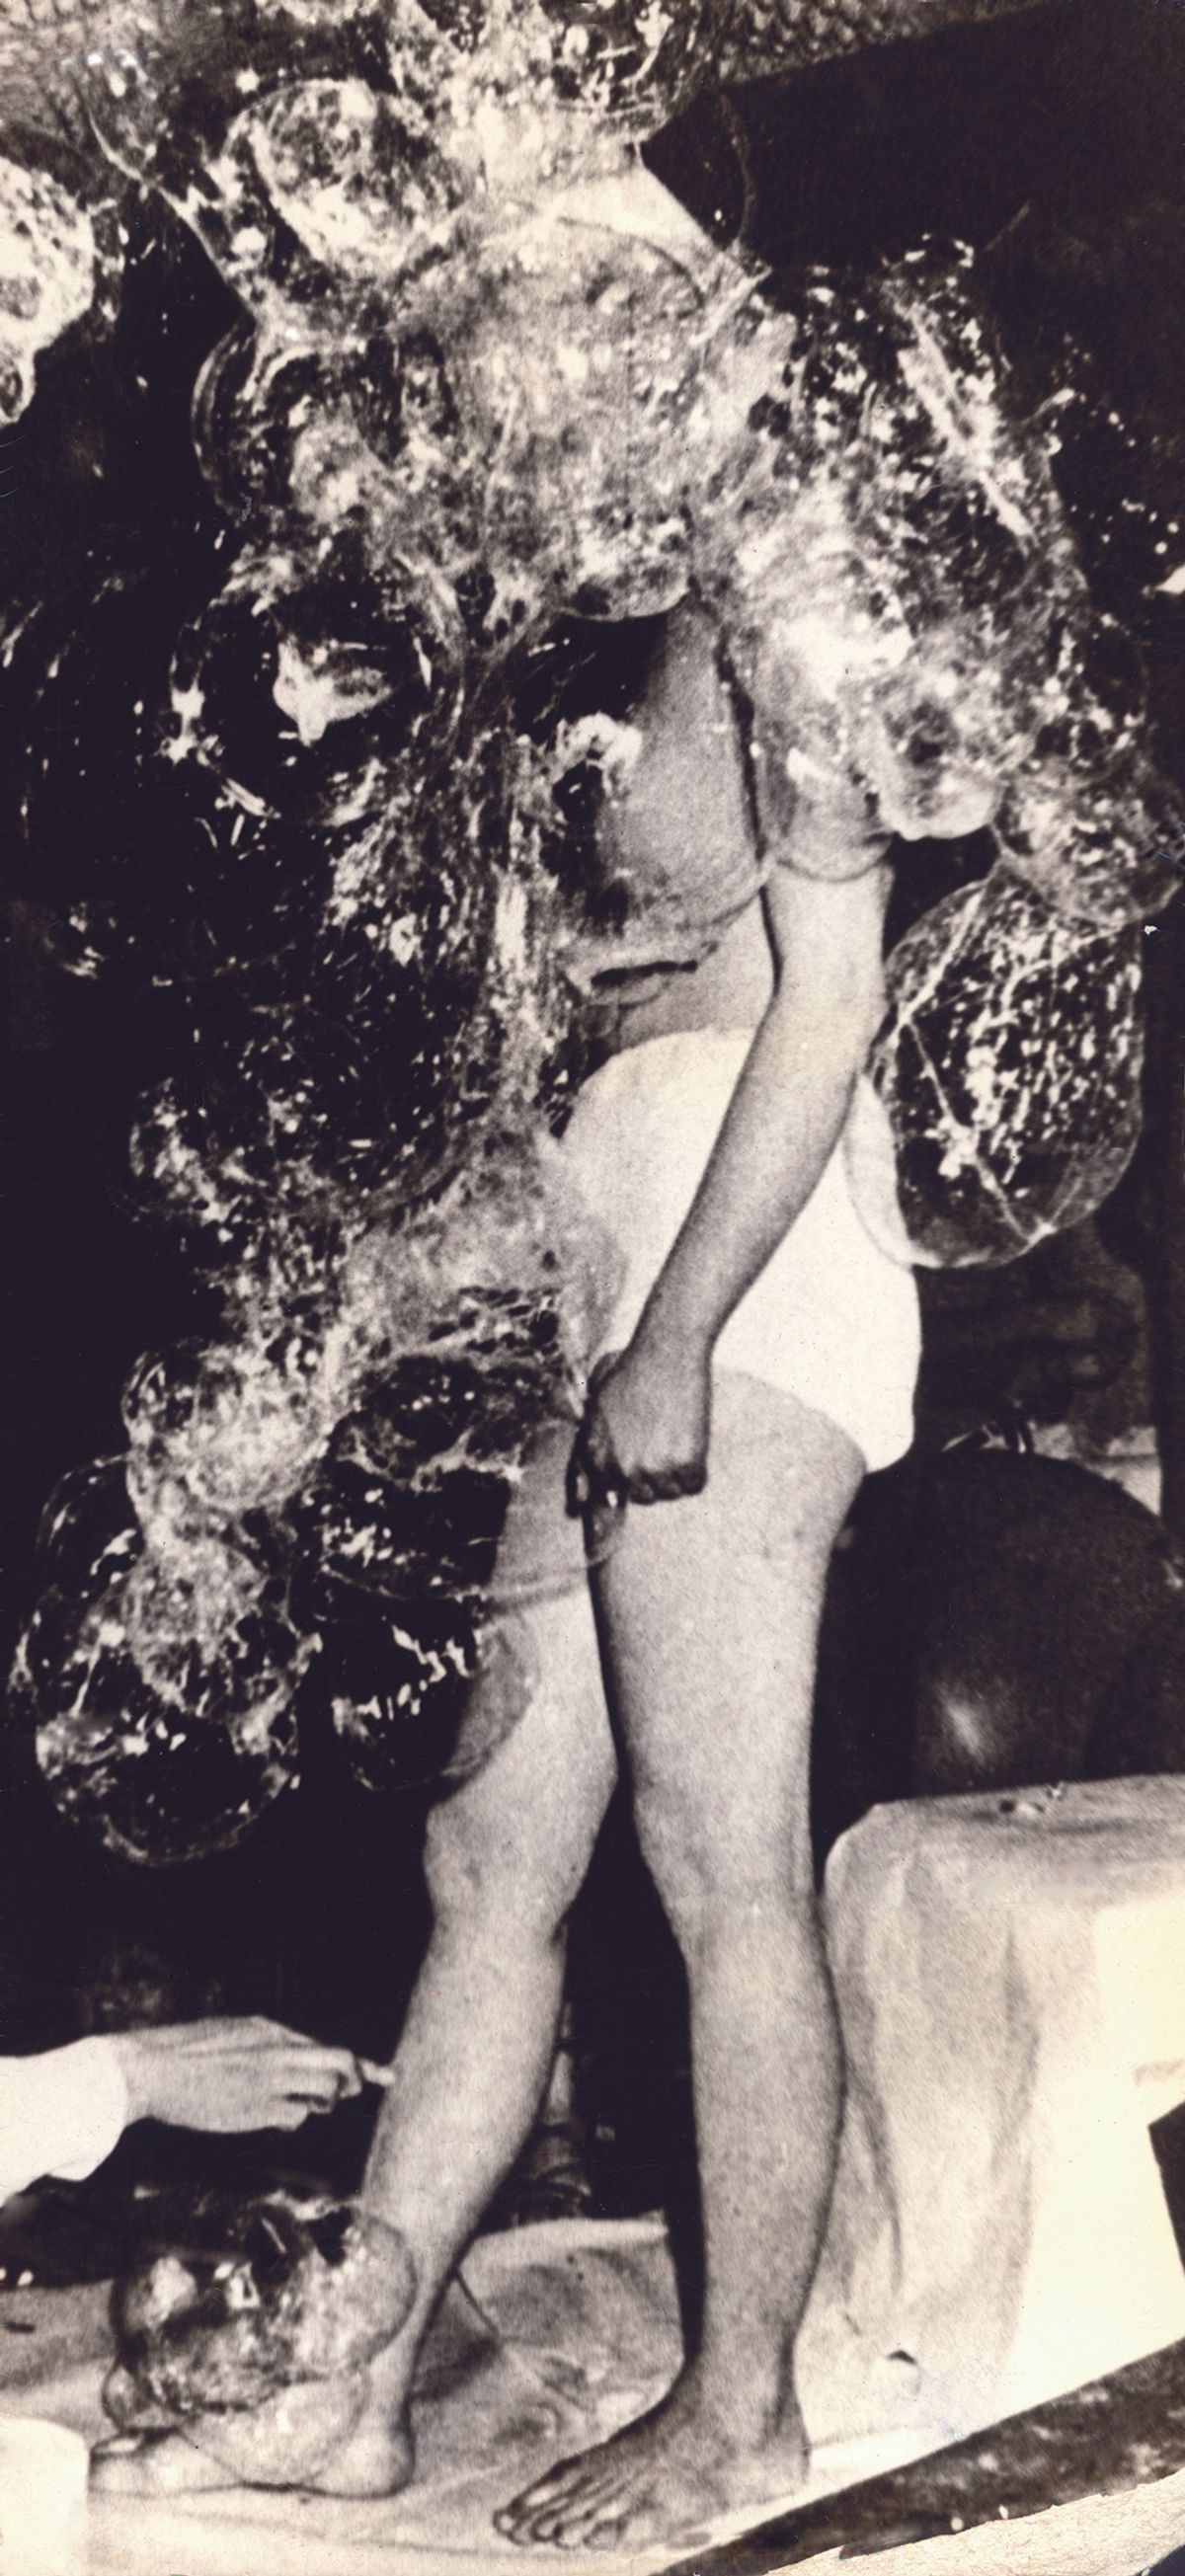 Jung Kangja’s partly-naked performance piece Transparent Balloons and Nude shocked the Korean art world and society at large in 1968

Courtesy of Kang Kookjin. © Estate of Jung Kangja